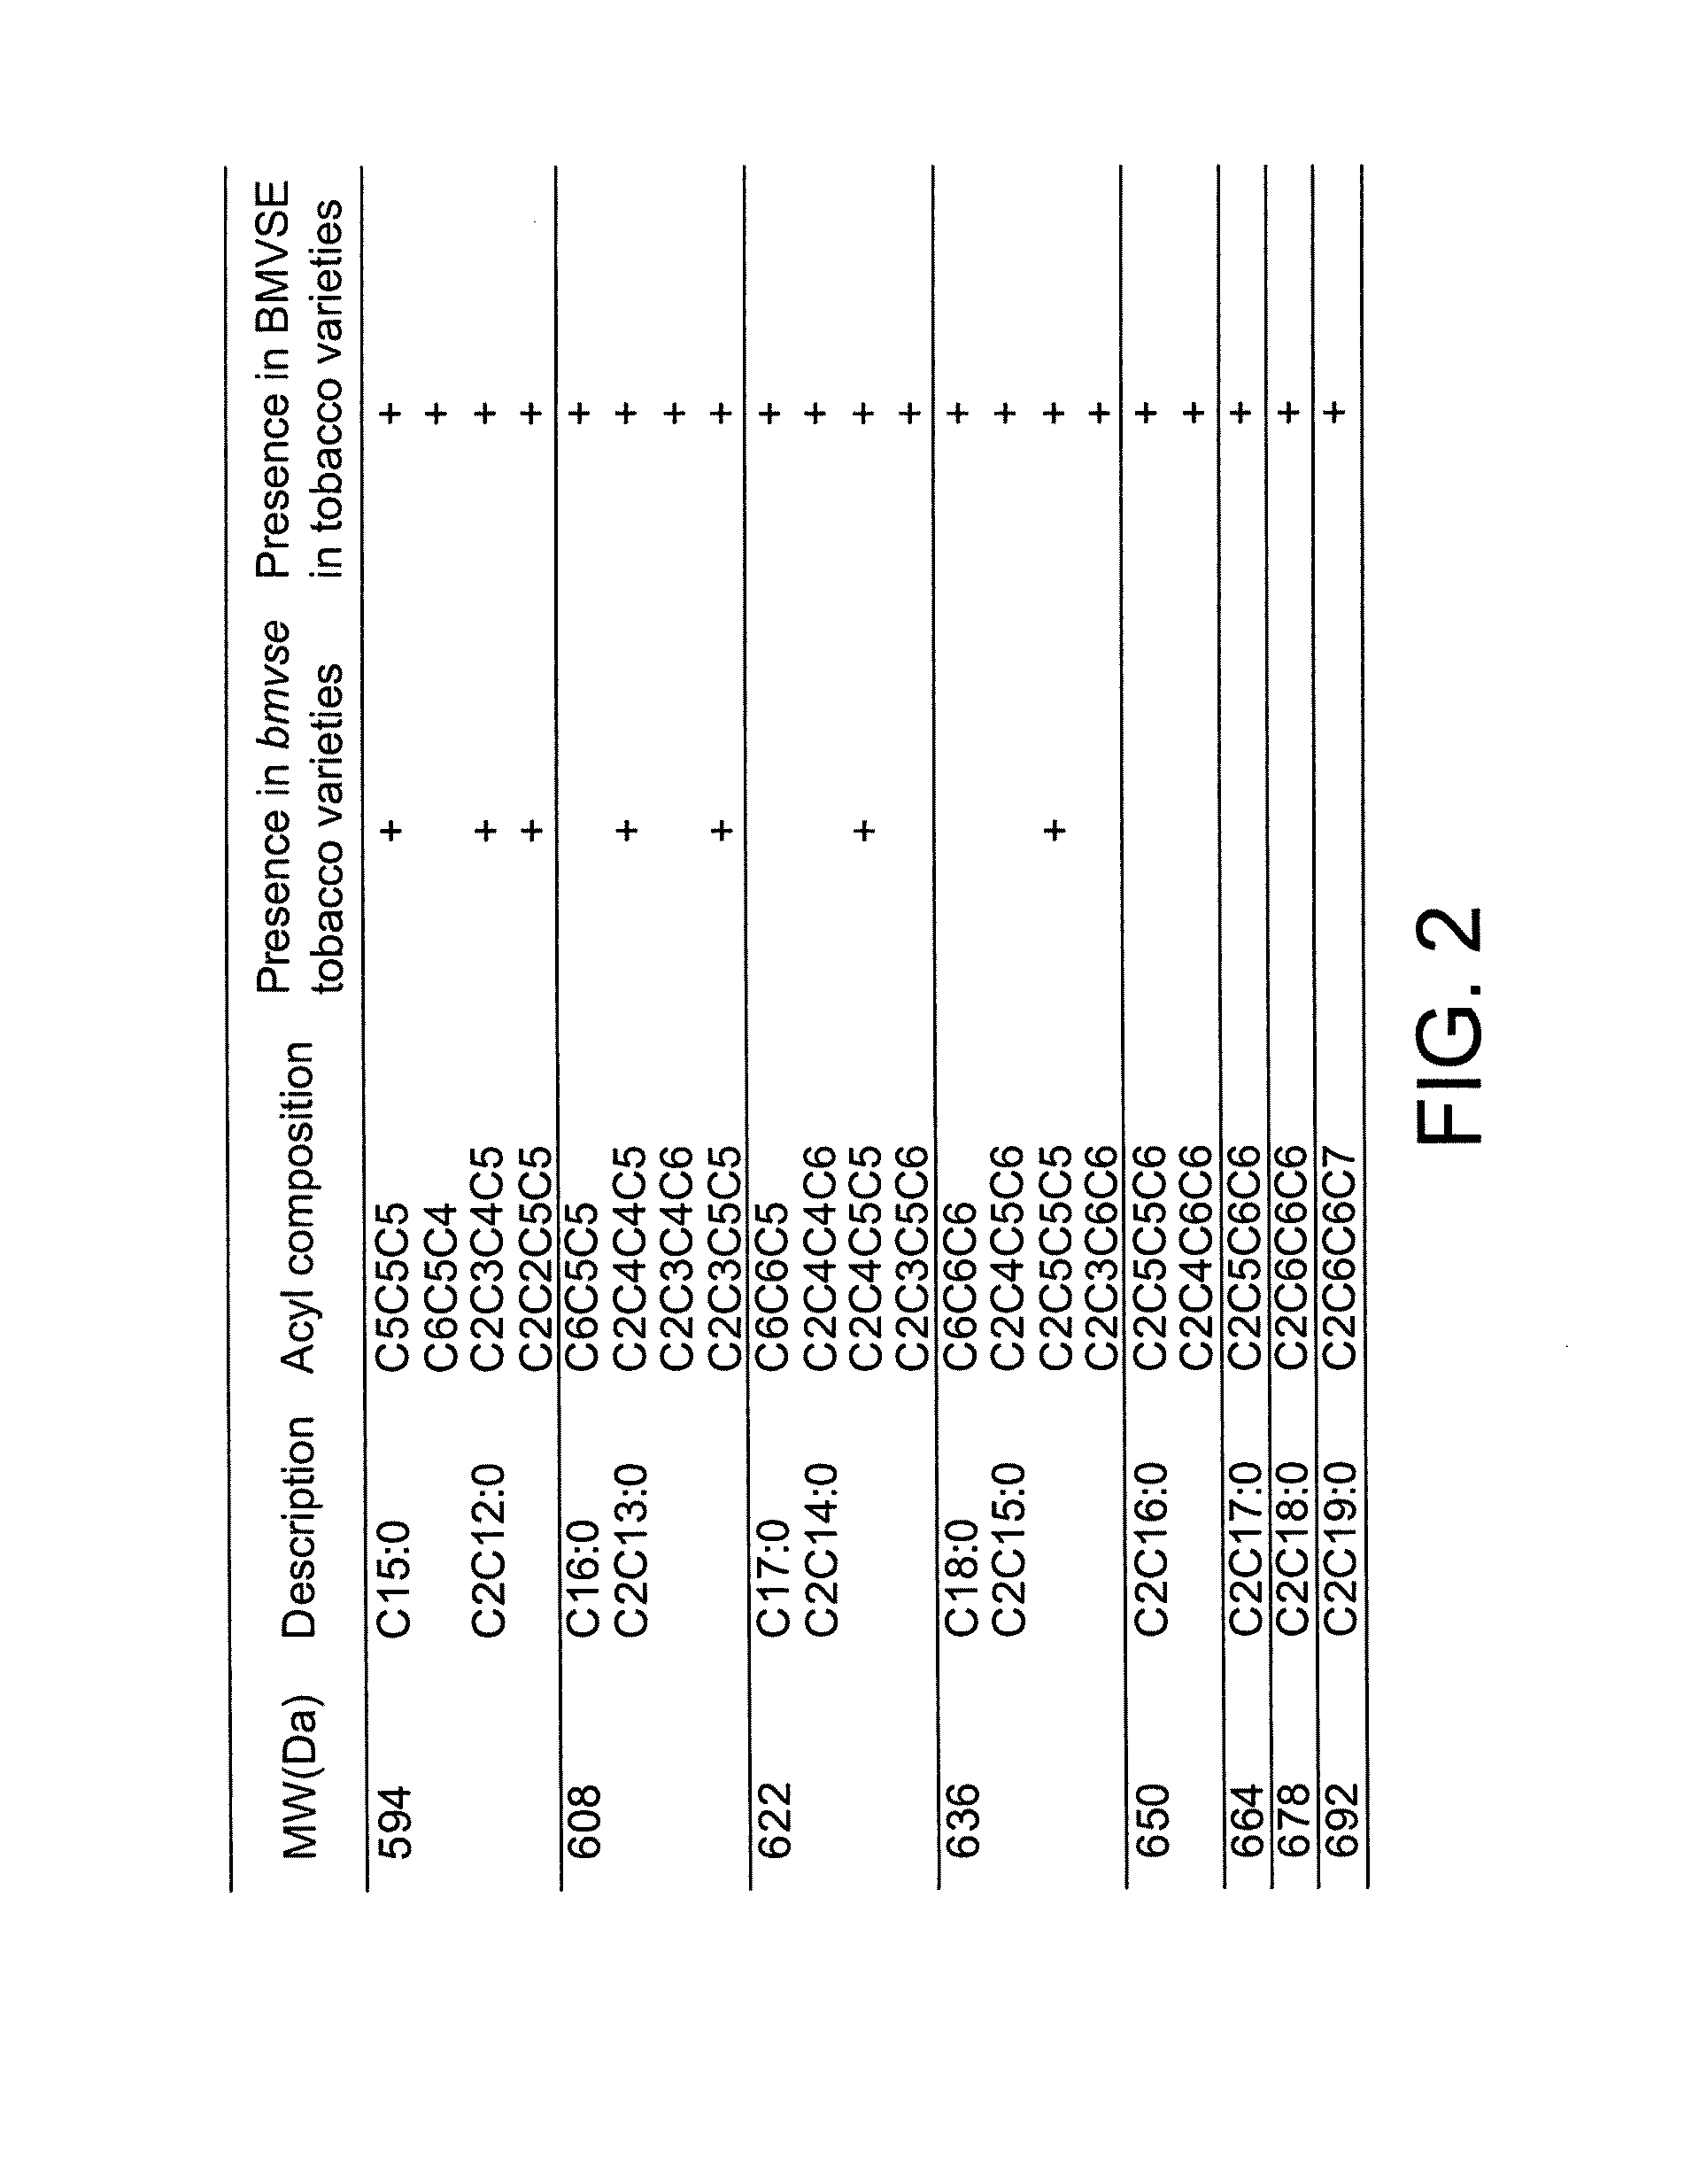 Isopropylmalate synthase from nicotiana tabacum and methods and uses thereof